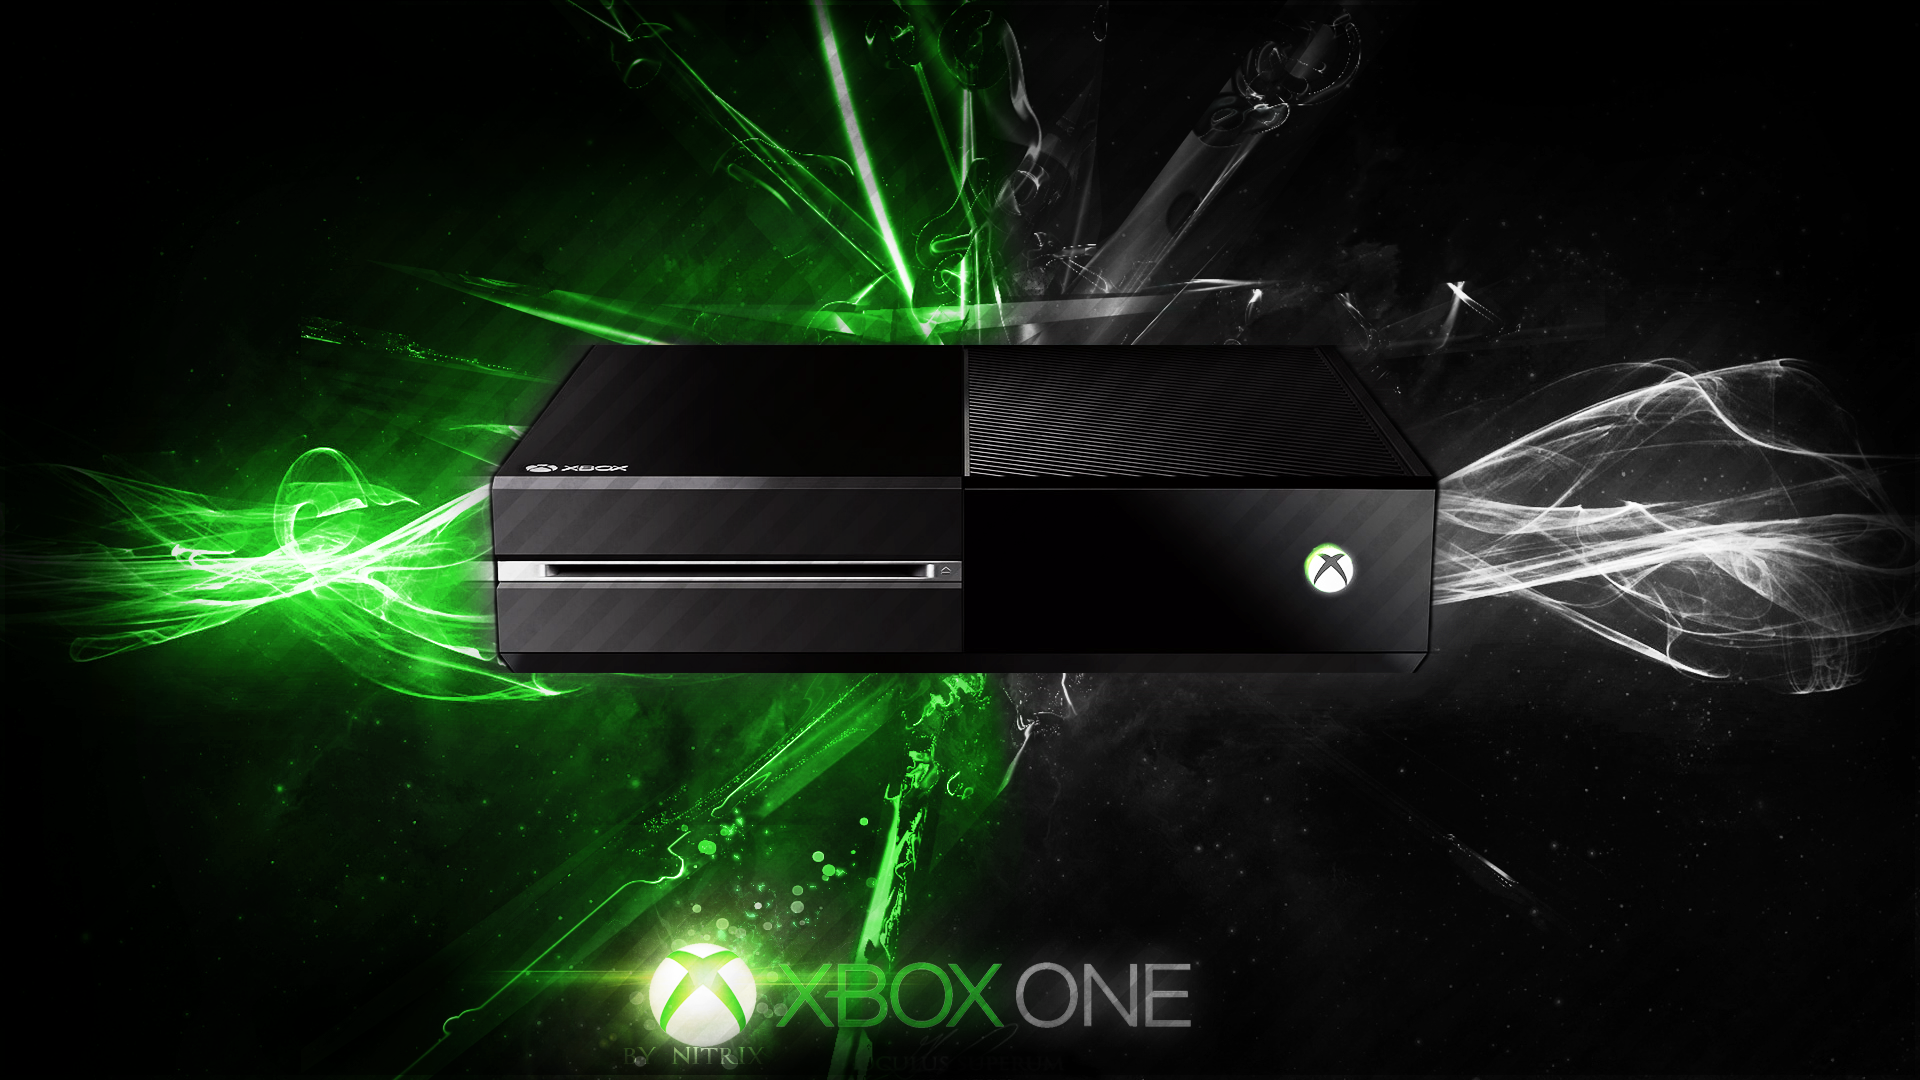 XBOX ONE WallpapersHD Wallpapers 1920x1080